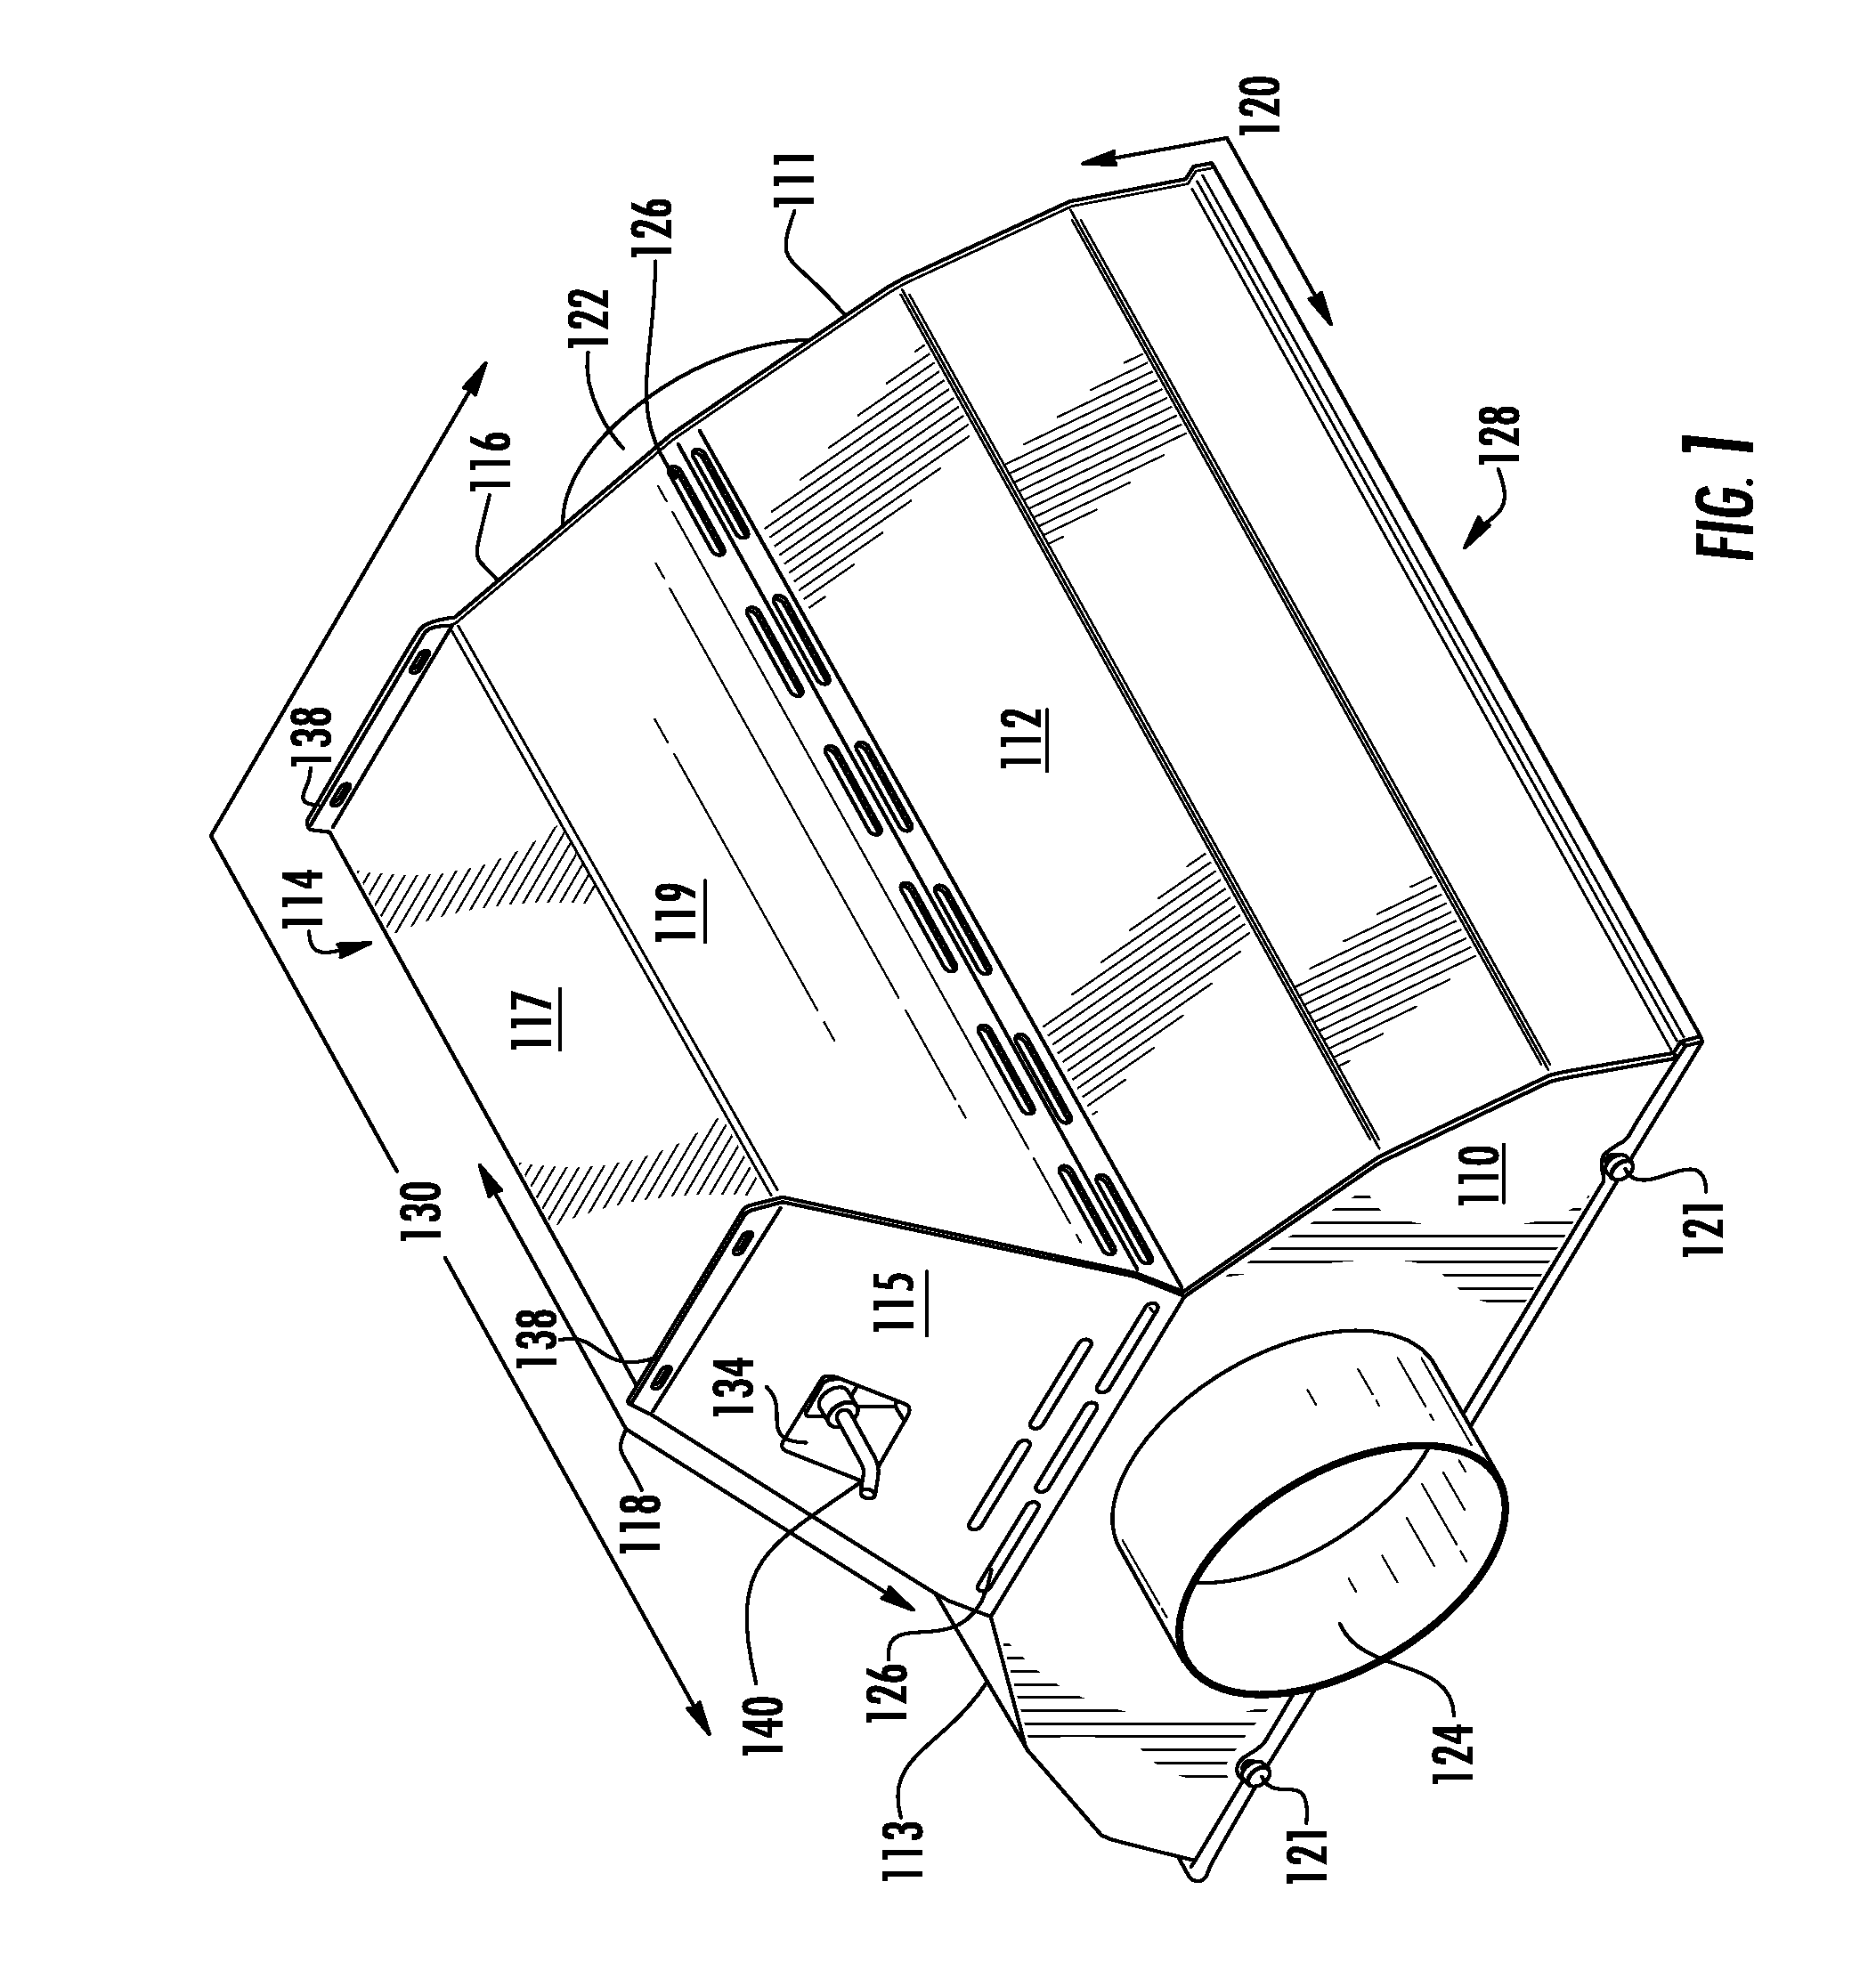 Horticulture light fixture having integrated lamp and ballast